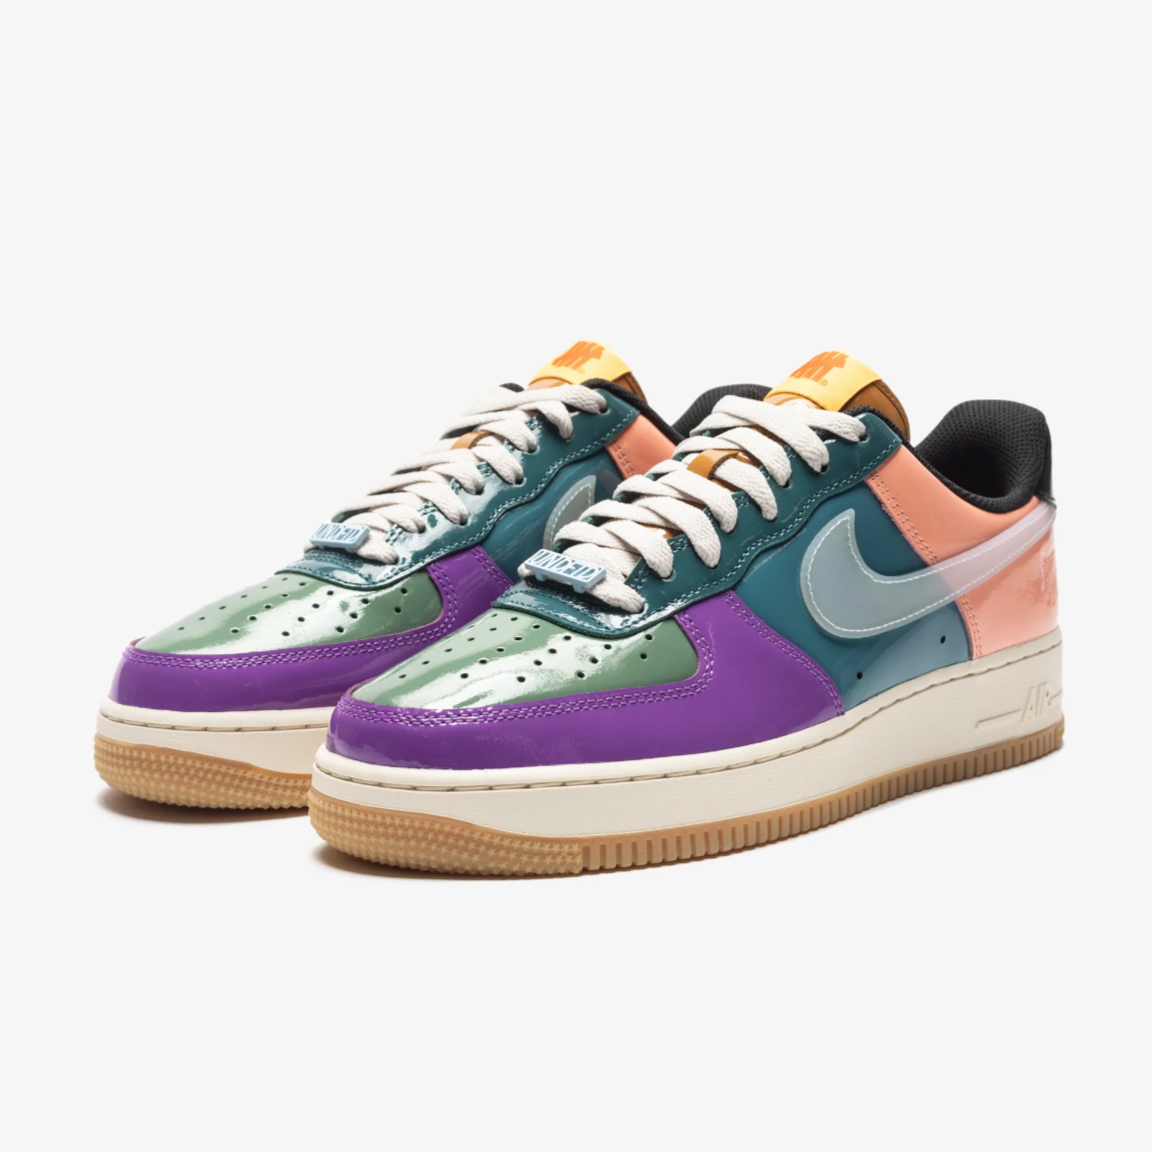 Air Force 1 Low x UNDEFEATED - Wild Berry/Celestine Blue/Multi